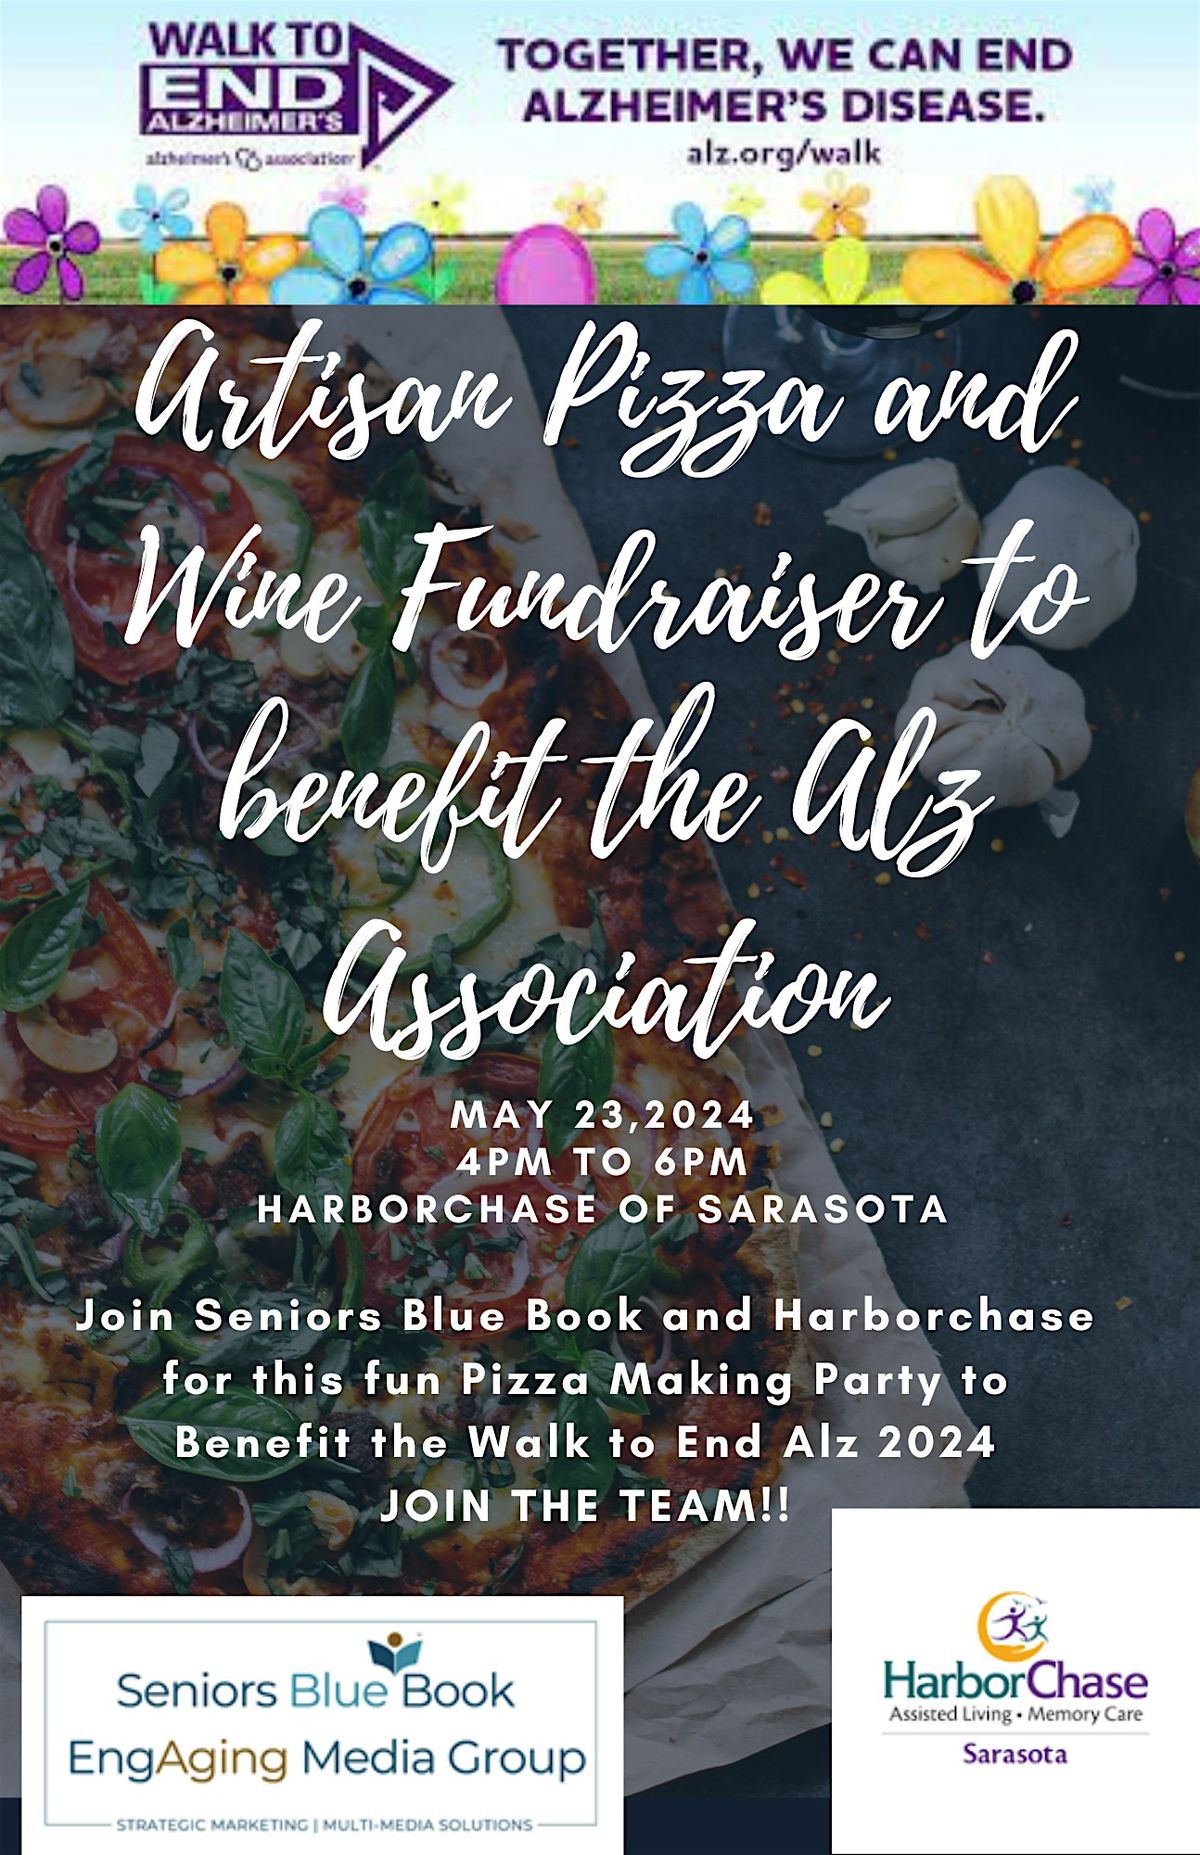 Pizza Making & Wine Party to Benefit The Walk to End Alzheimer's 2024